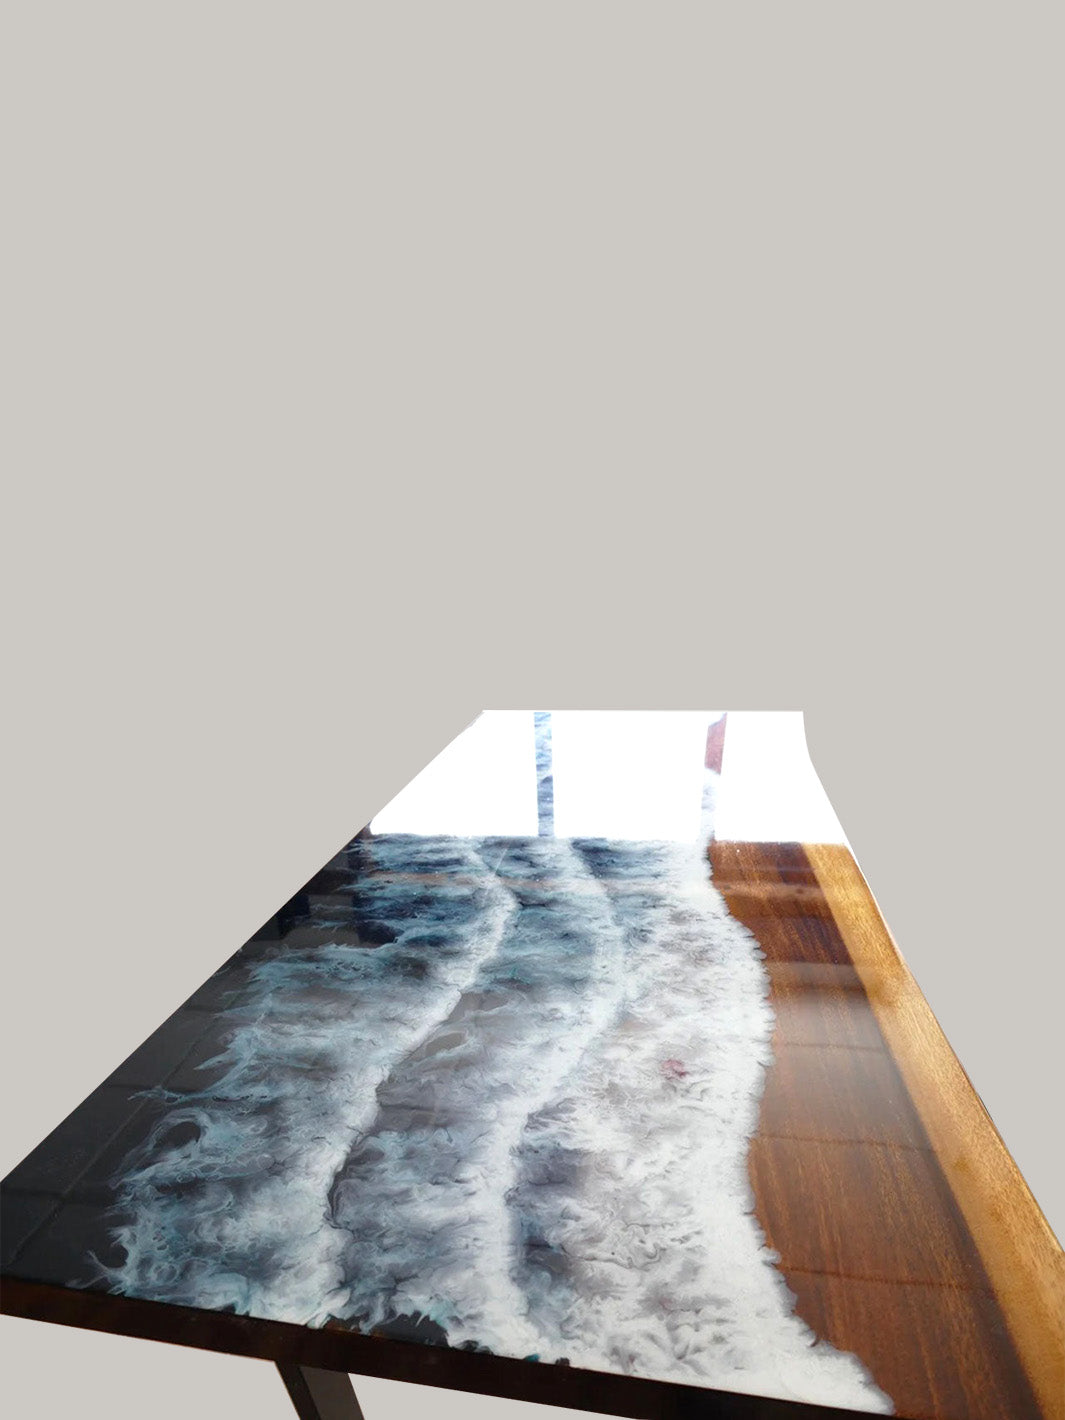 Handcrafted River Beach Epoxy Resin Wooden Coffee Table | 150x55cm Made 4 Decor Tables MDR0005-2